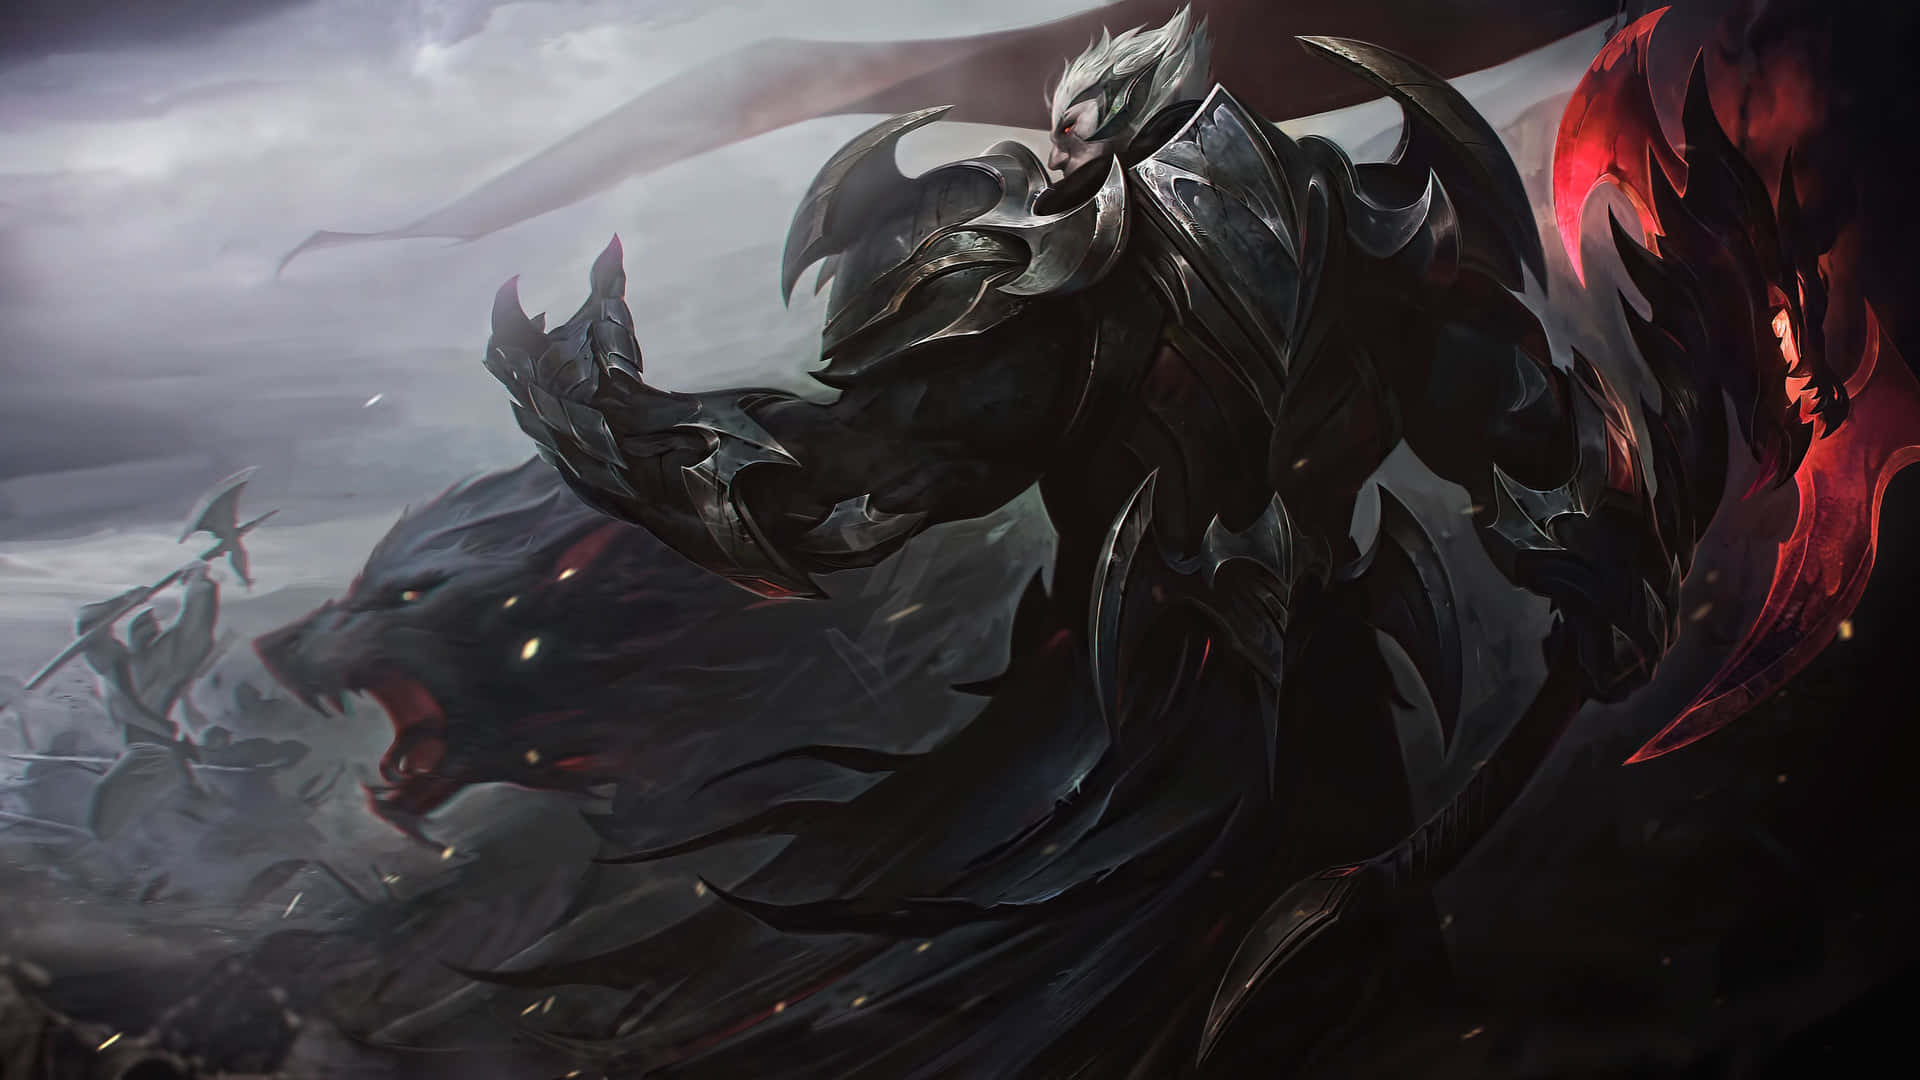 Join the League of Legends and challenge your opponents to an epic battle! Wallpaper